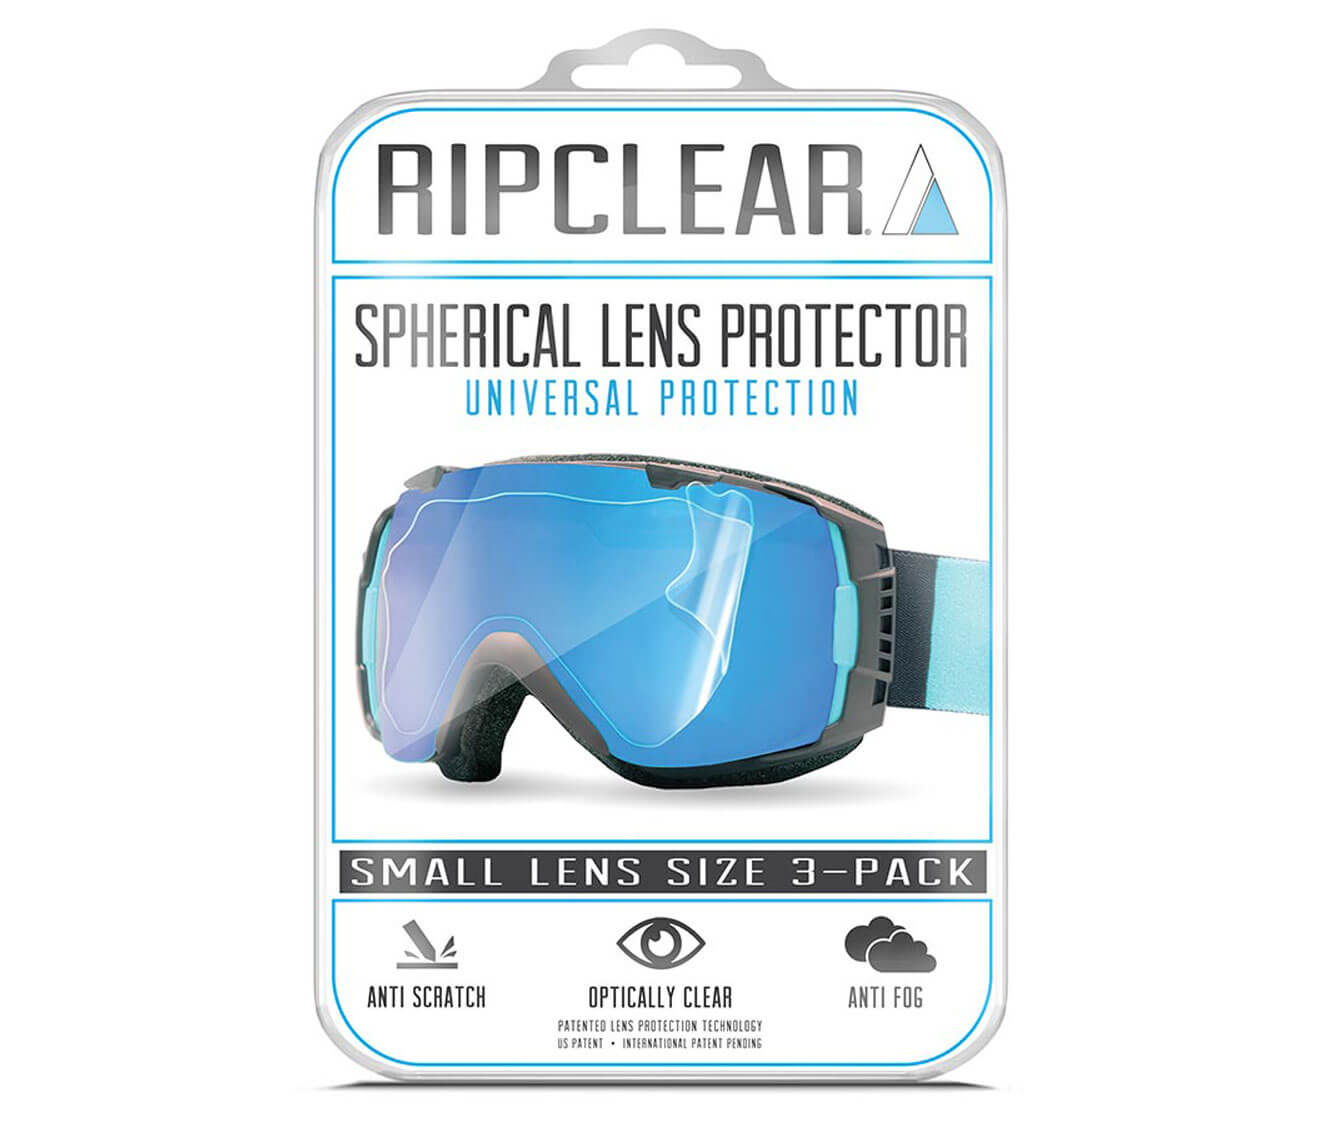 Ripclear Spherical Universal Small Snow Goggle Lens Protector - 3 Pack